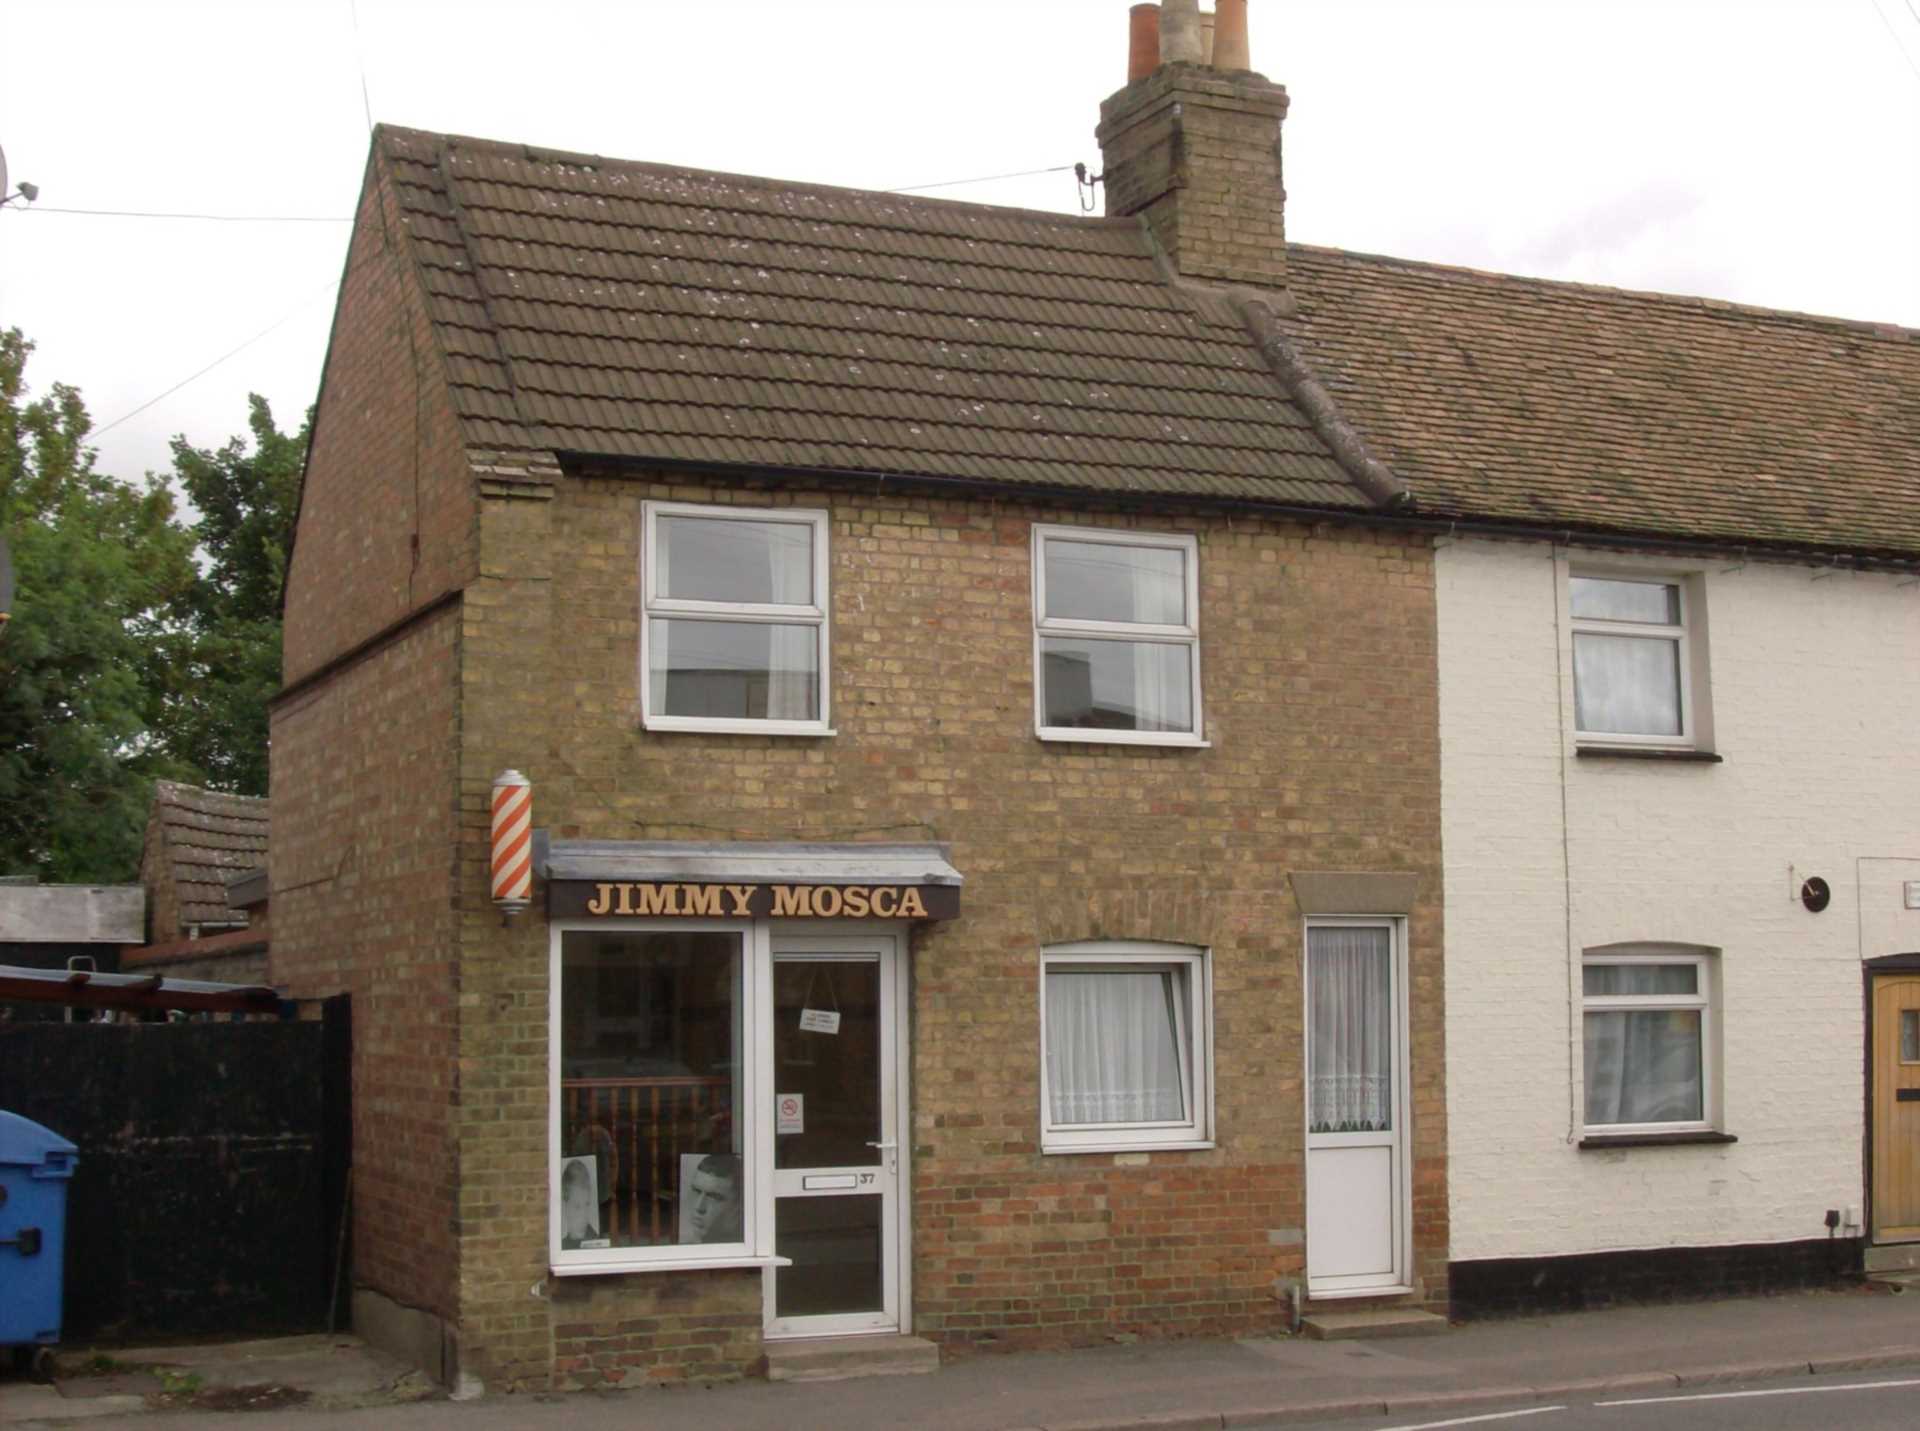 3 bed End Terraced House for rent in St Neots. From Noonan Crane Property Management